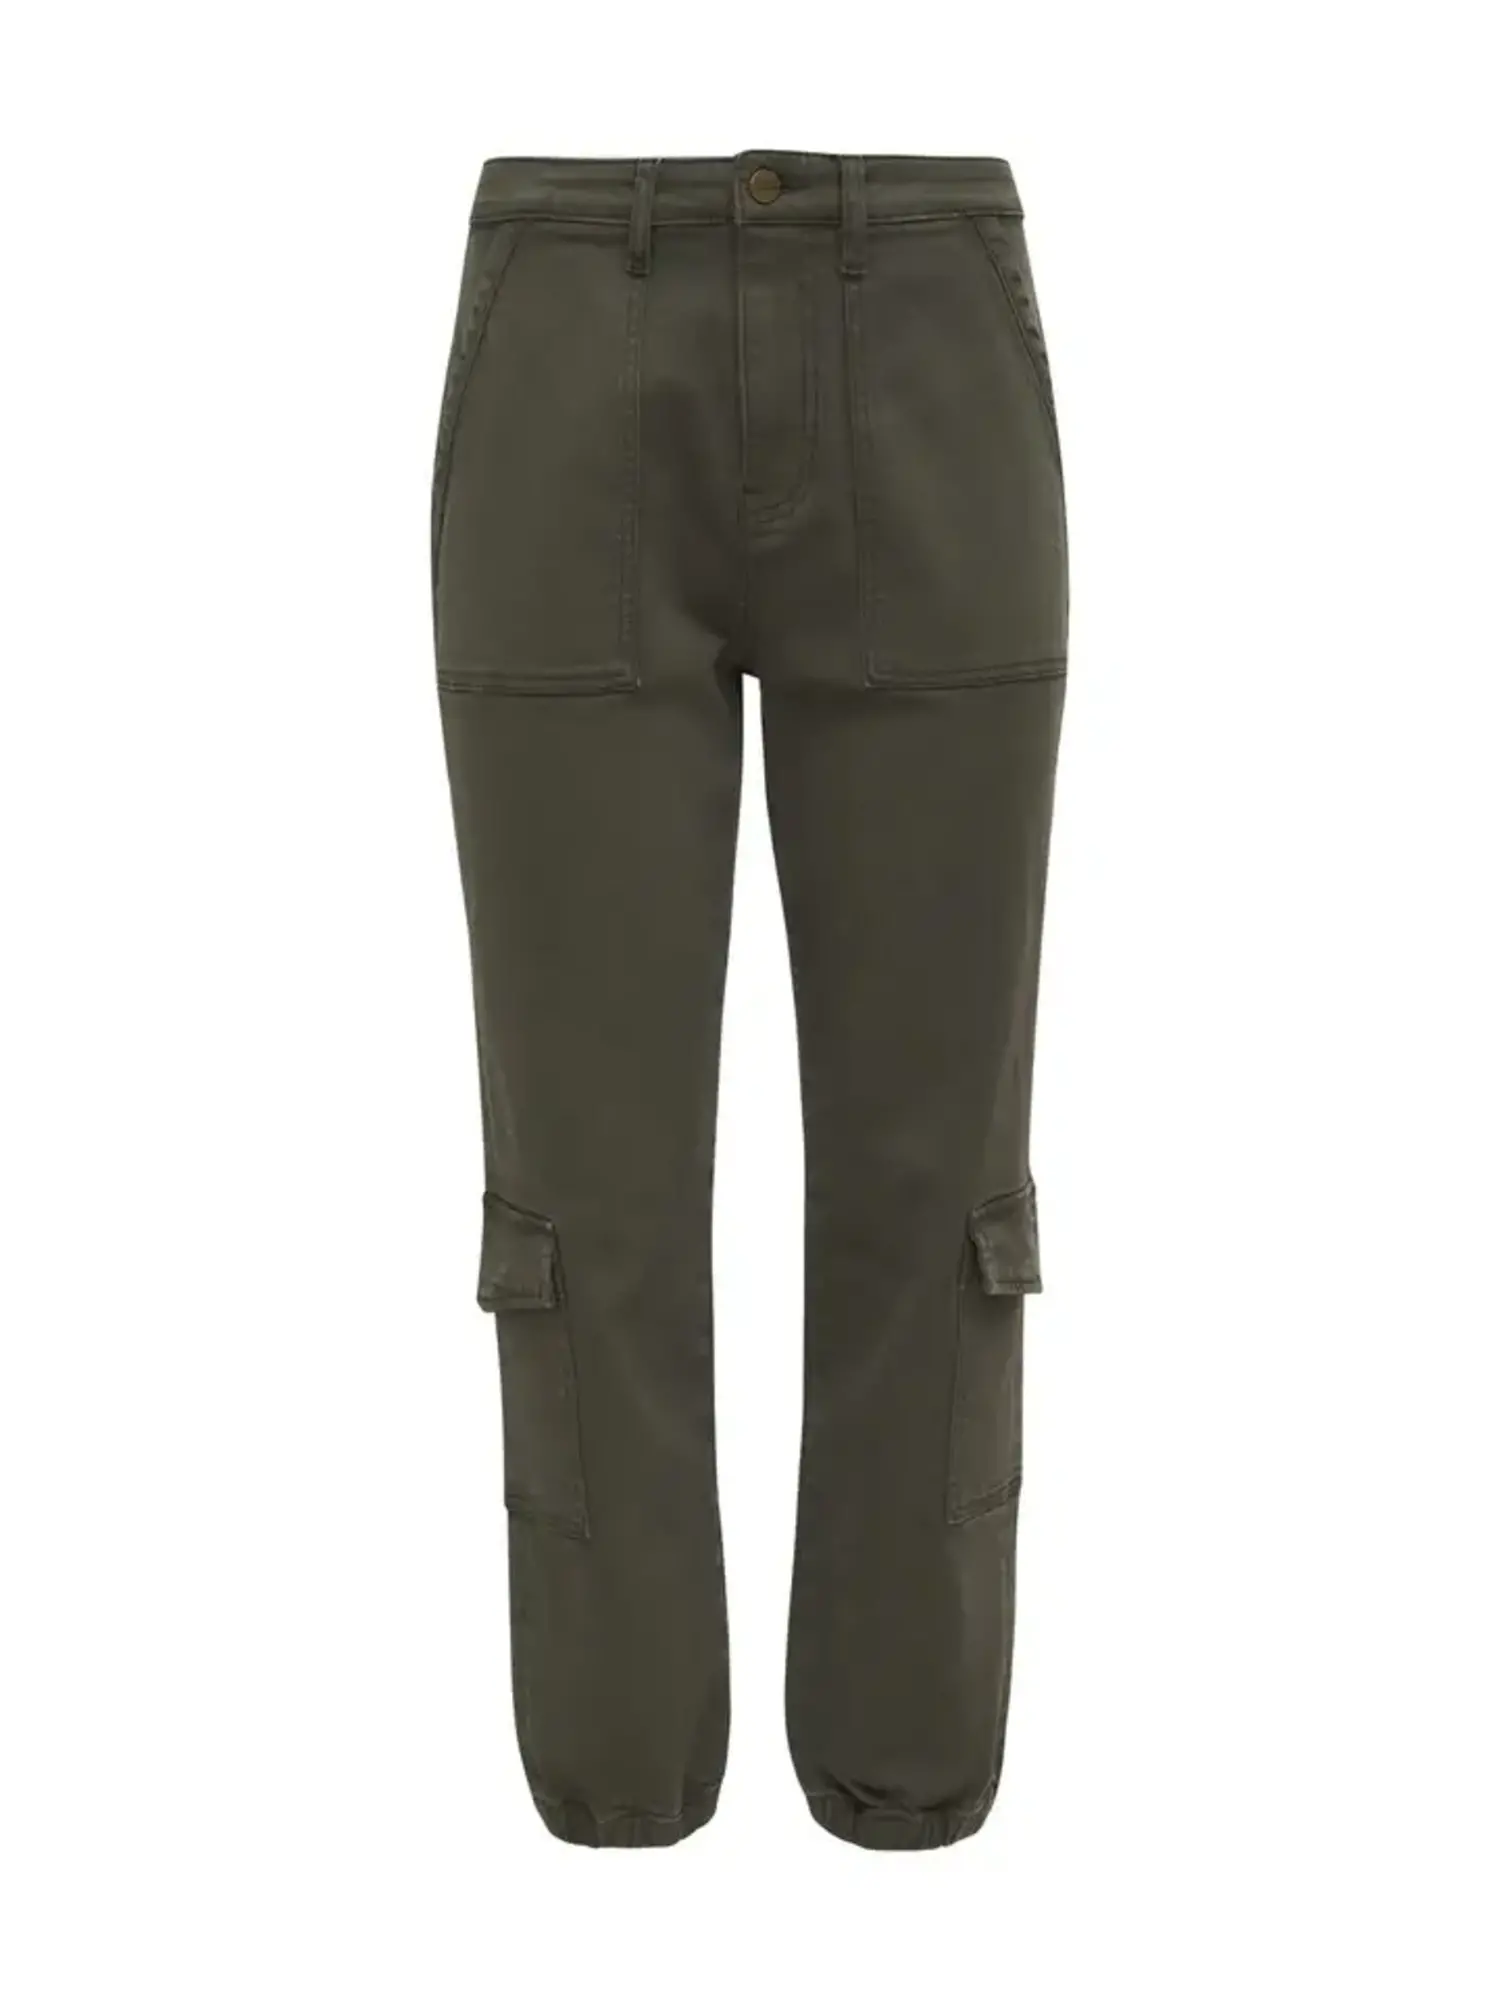 Sanctuary  Brooklyn Cargo Denim Pant Mossy Green - Tryst Boutique